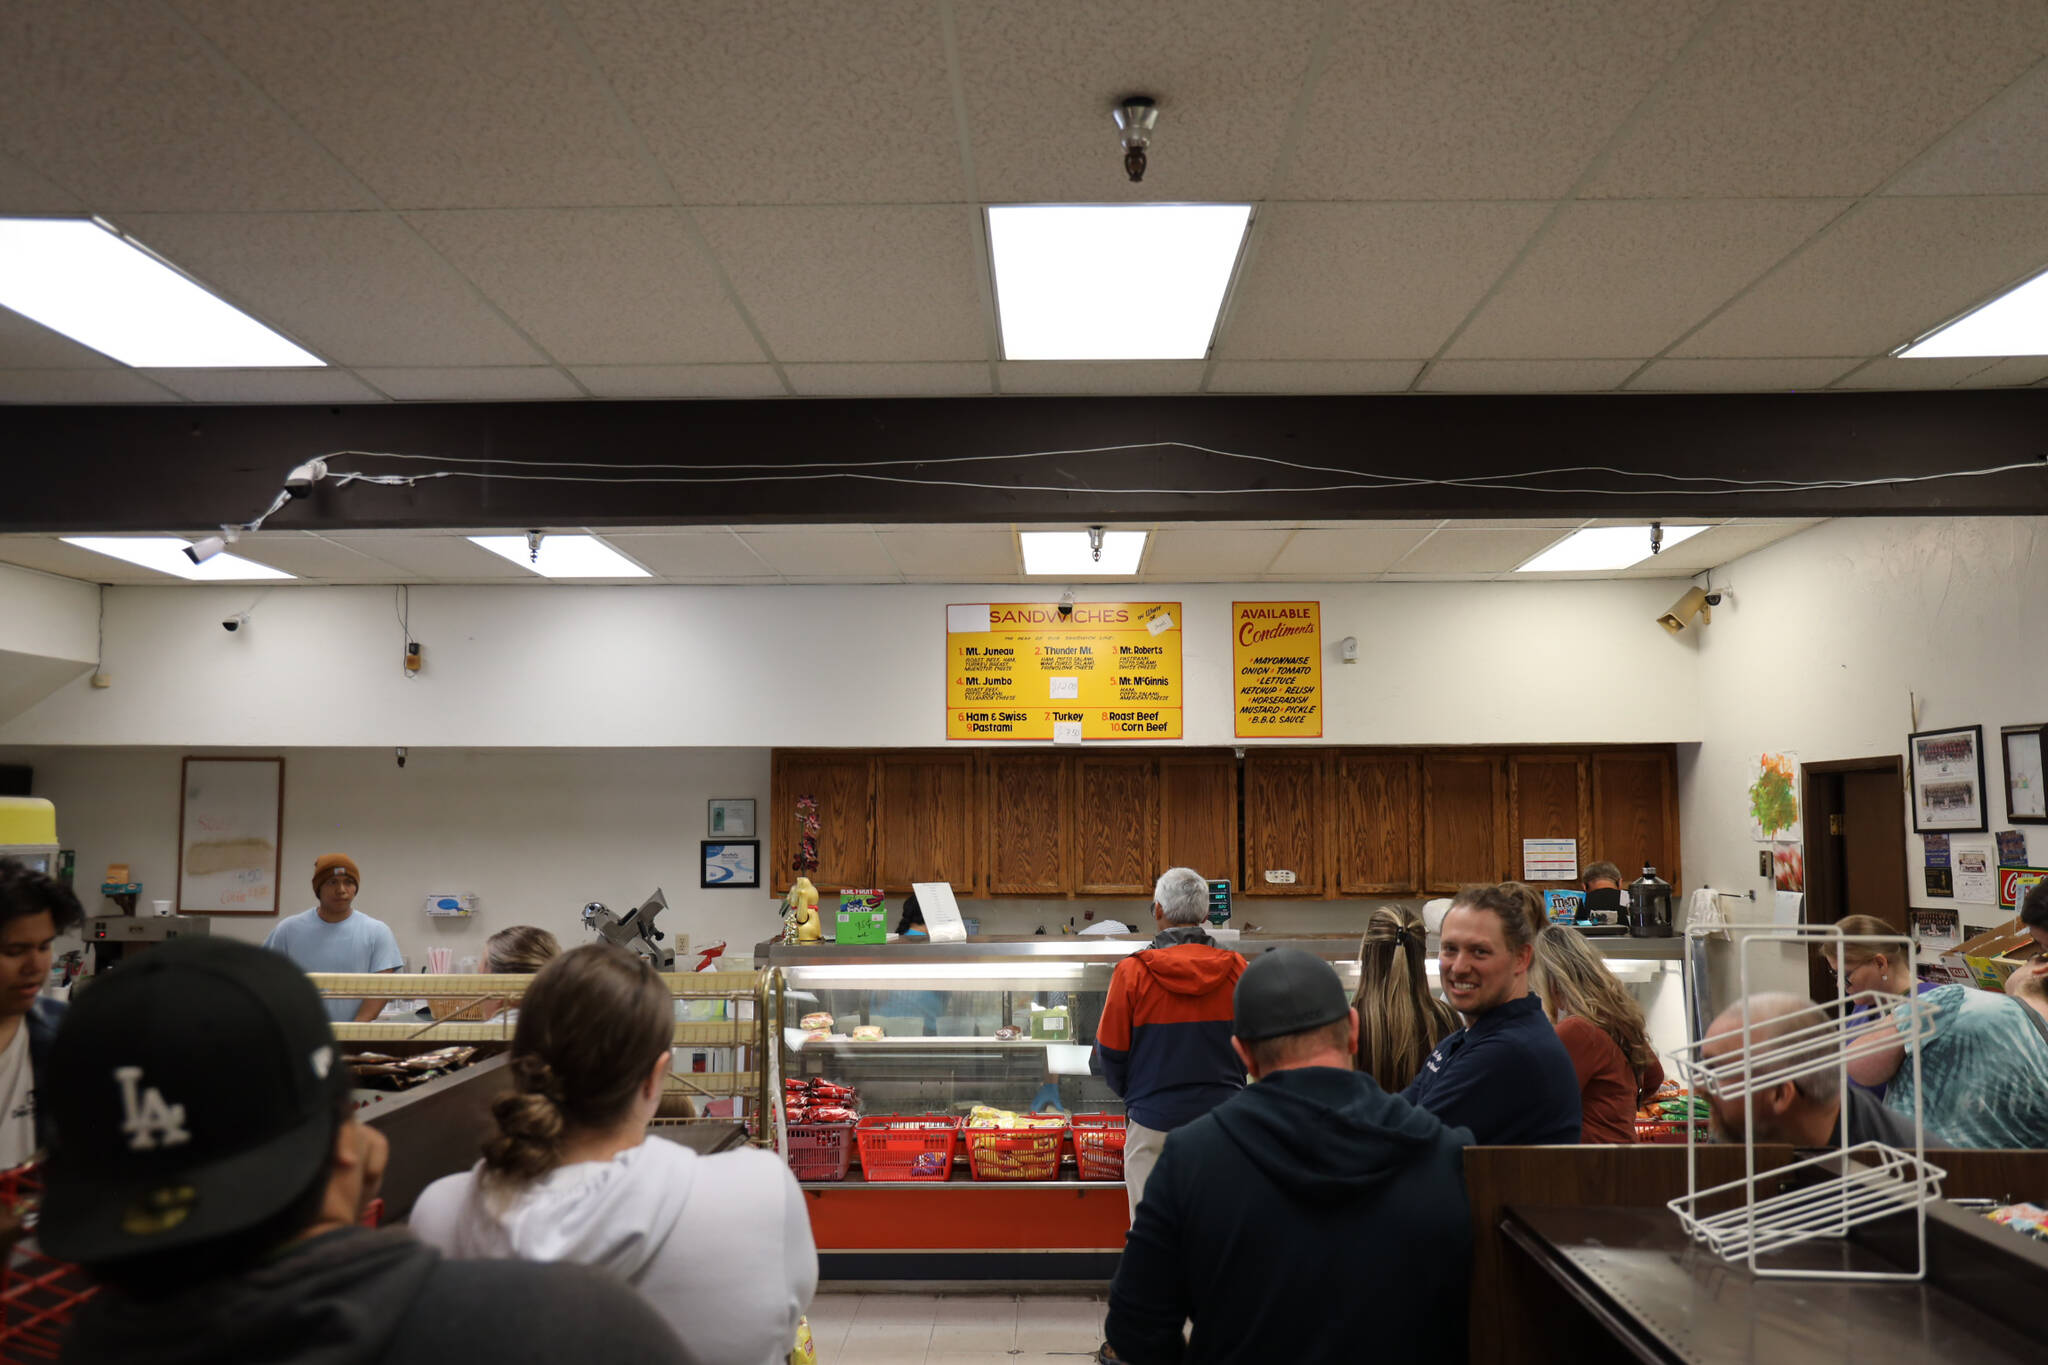 A crowd of customers surround the deli counter at J&J Deli and Asian Mart on Monday afternoon amid a lunch rush on the business’s last day open after more than four decades. (Clarise Larson / Juneau Empire)